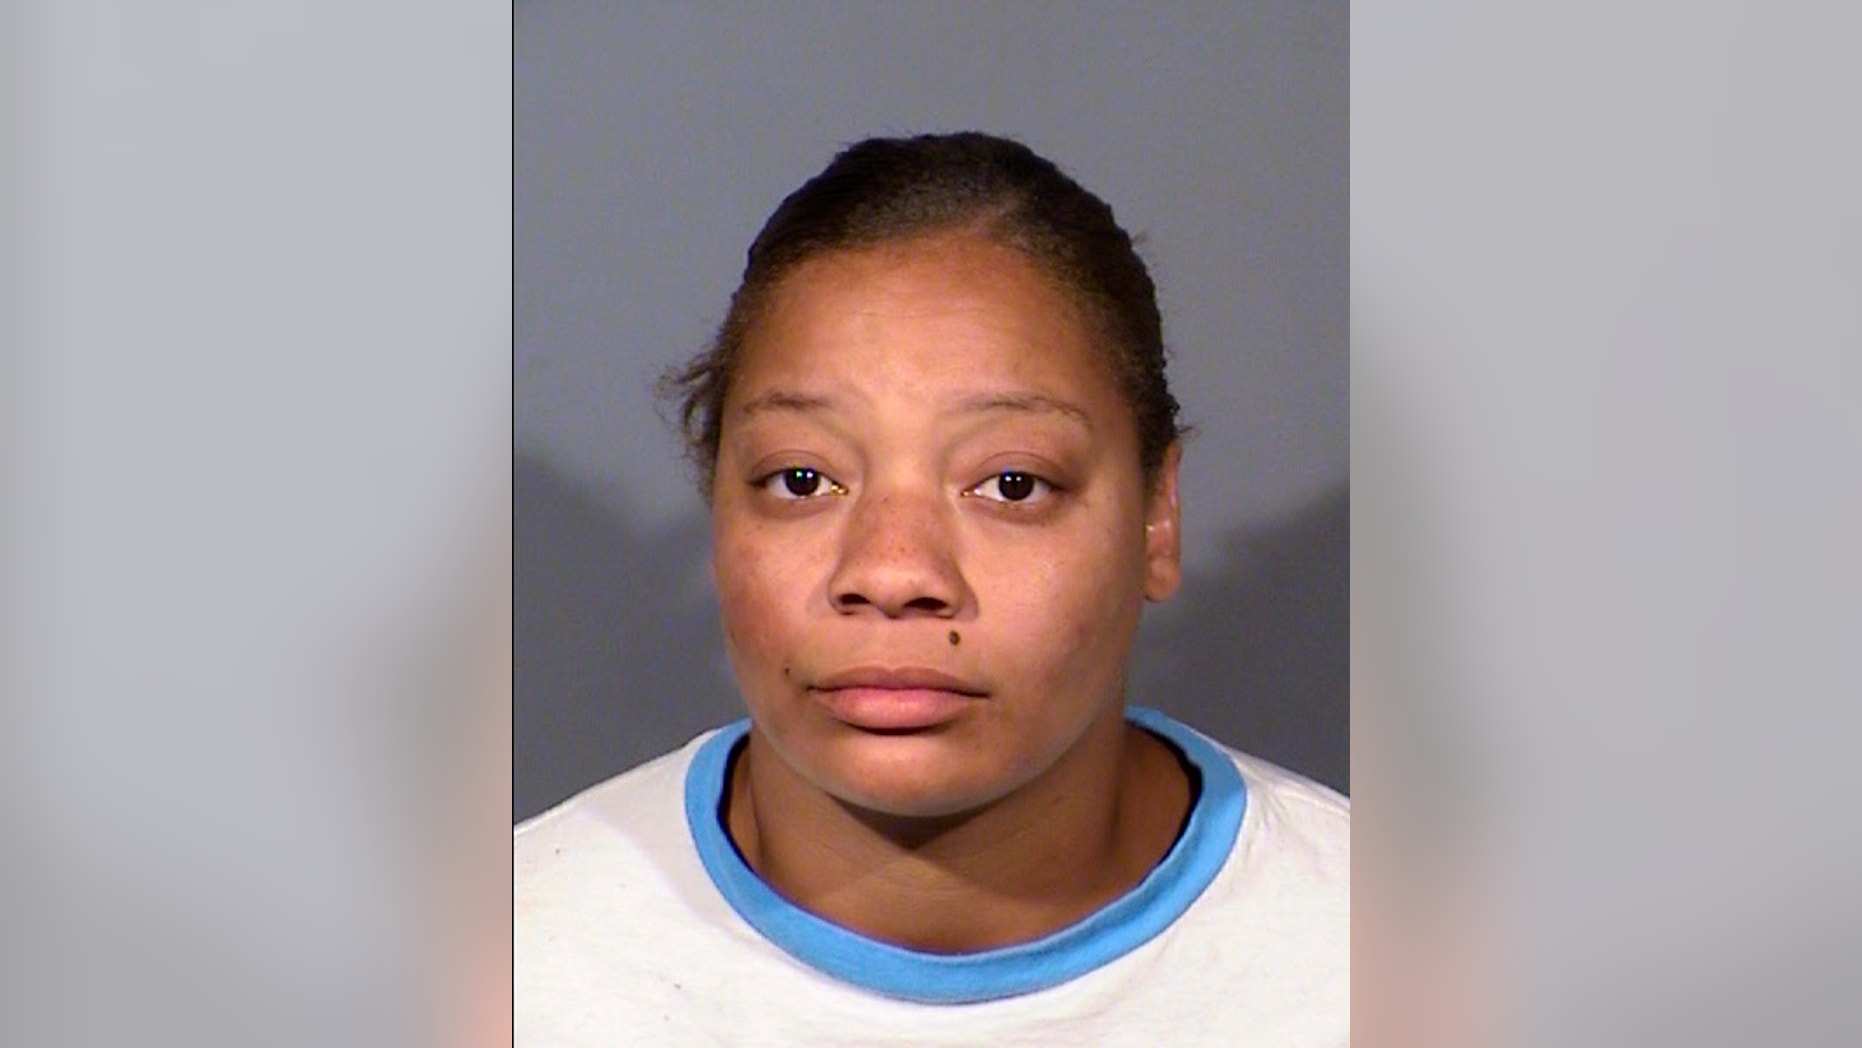 This undated reservation photo from the Clark County Detention Center shows Cadesha Michelle Bishop of Las Vegas. On Monday, May 6, 2019, Bishop, 25, was arrested for murder following the death of 74-year-old Serge Fournier. The authorities claim that he was fatally injured during a fall on a sidewalk when Bishop pushed him and his walker in front of a public transit bus on March 21, 2019. The coroner Clark County stated that on April 23, 2019, Fournier's death was a homicide resulting from his injuries. (Clark County Detention Center via AP)